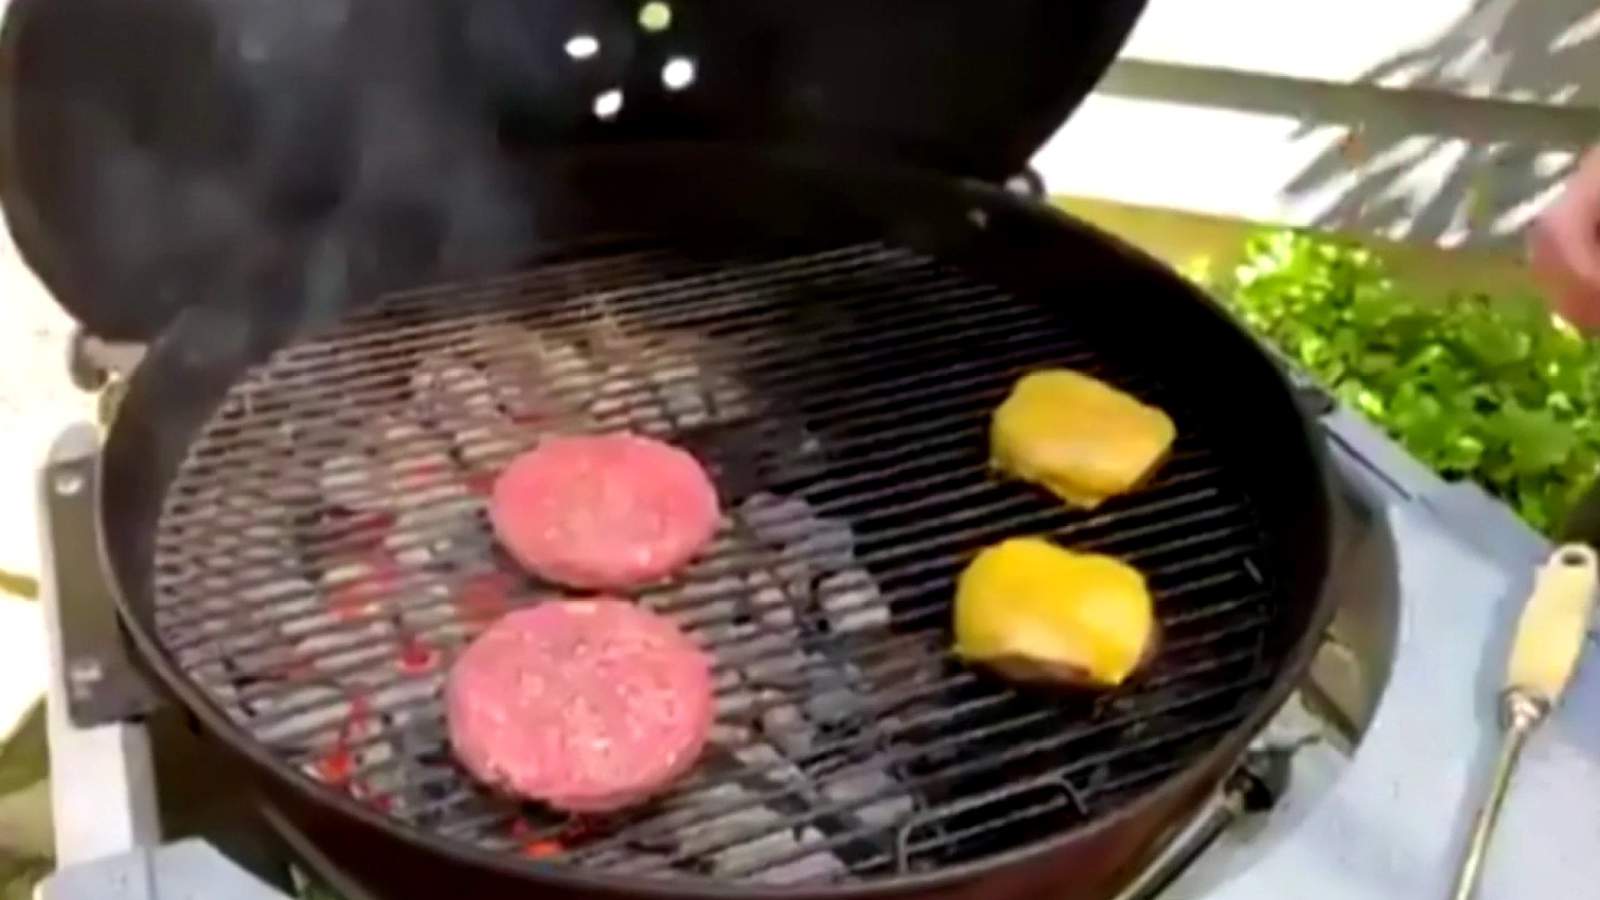 Fired up burgers for the 4th of July